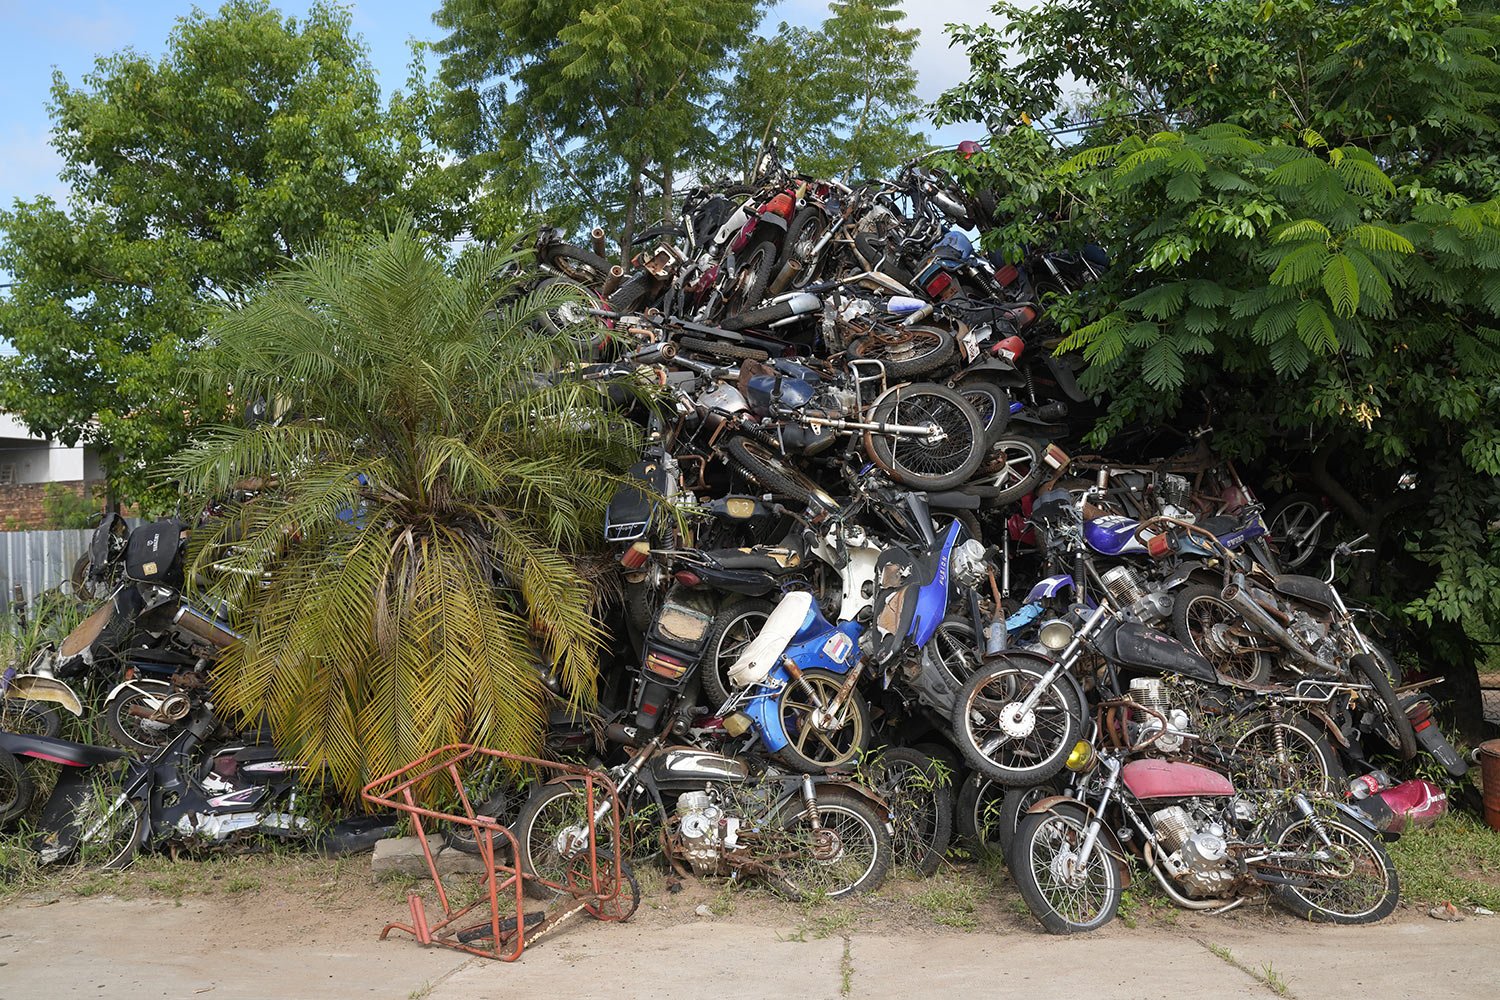  Motorcycles seized by police for being allegedly stolen lay in a pile at the municipal police in Asuncion, Paraguay, Monday, March 13, 2023. (AP Photo/Jorge Saenz) 